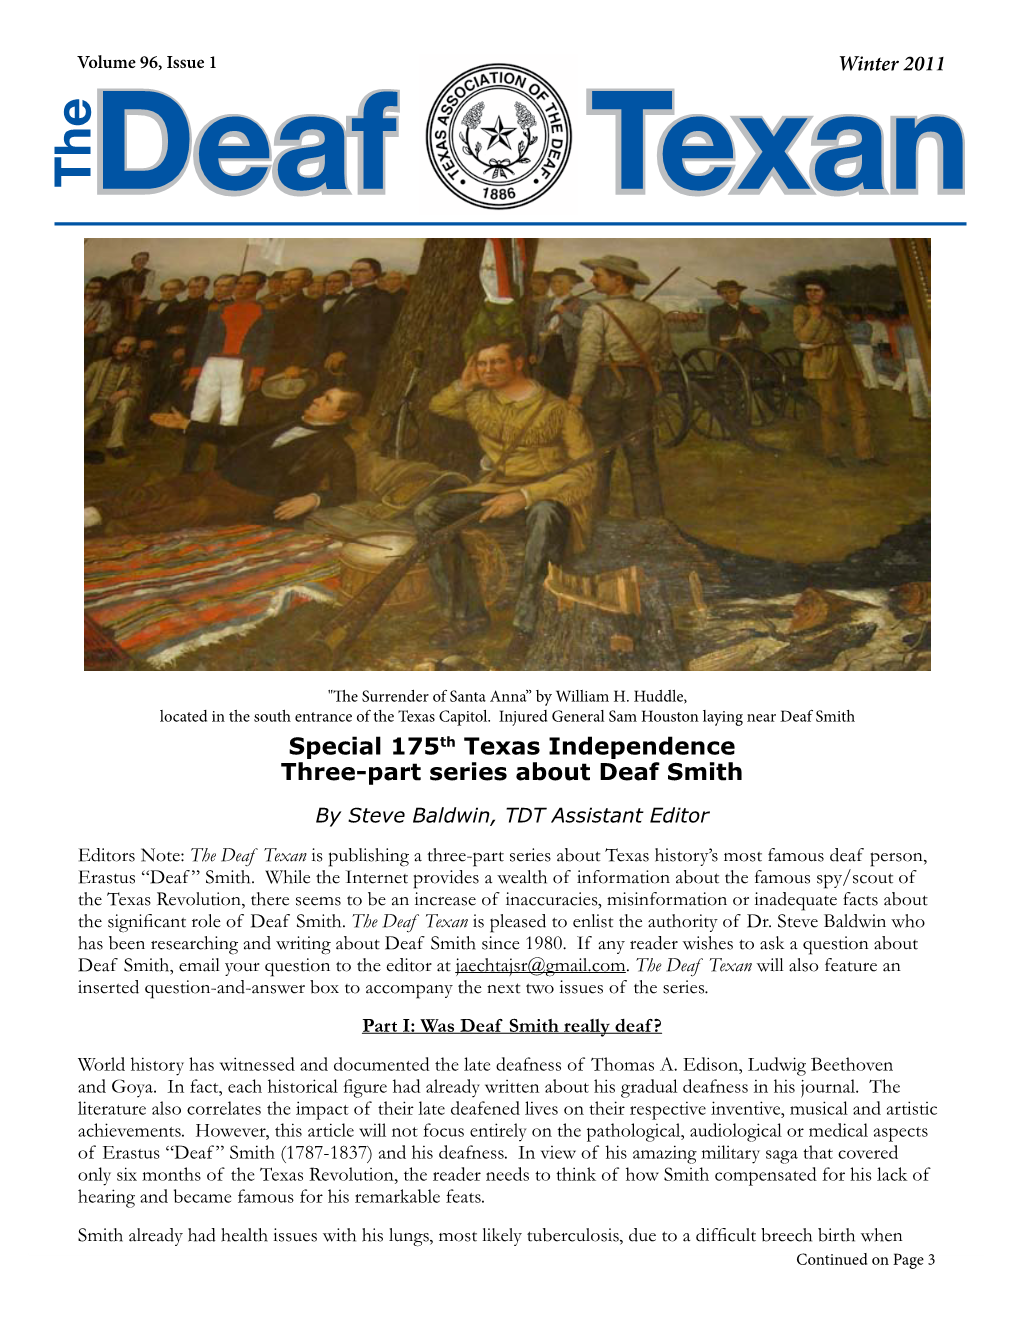 Special 175Th Texas Independence Three-Part Series About Deaf Smith